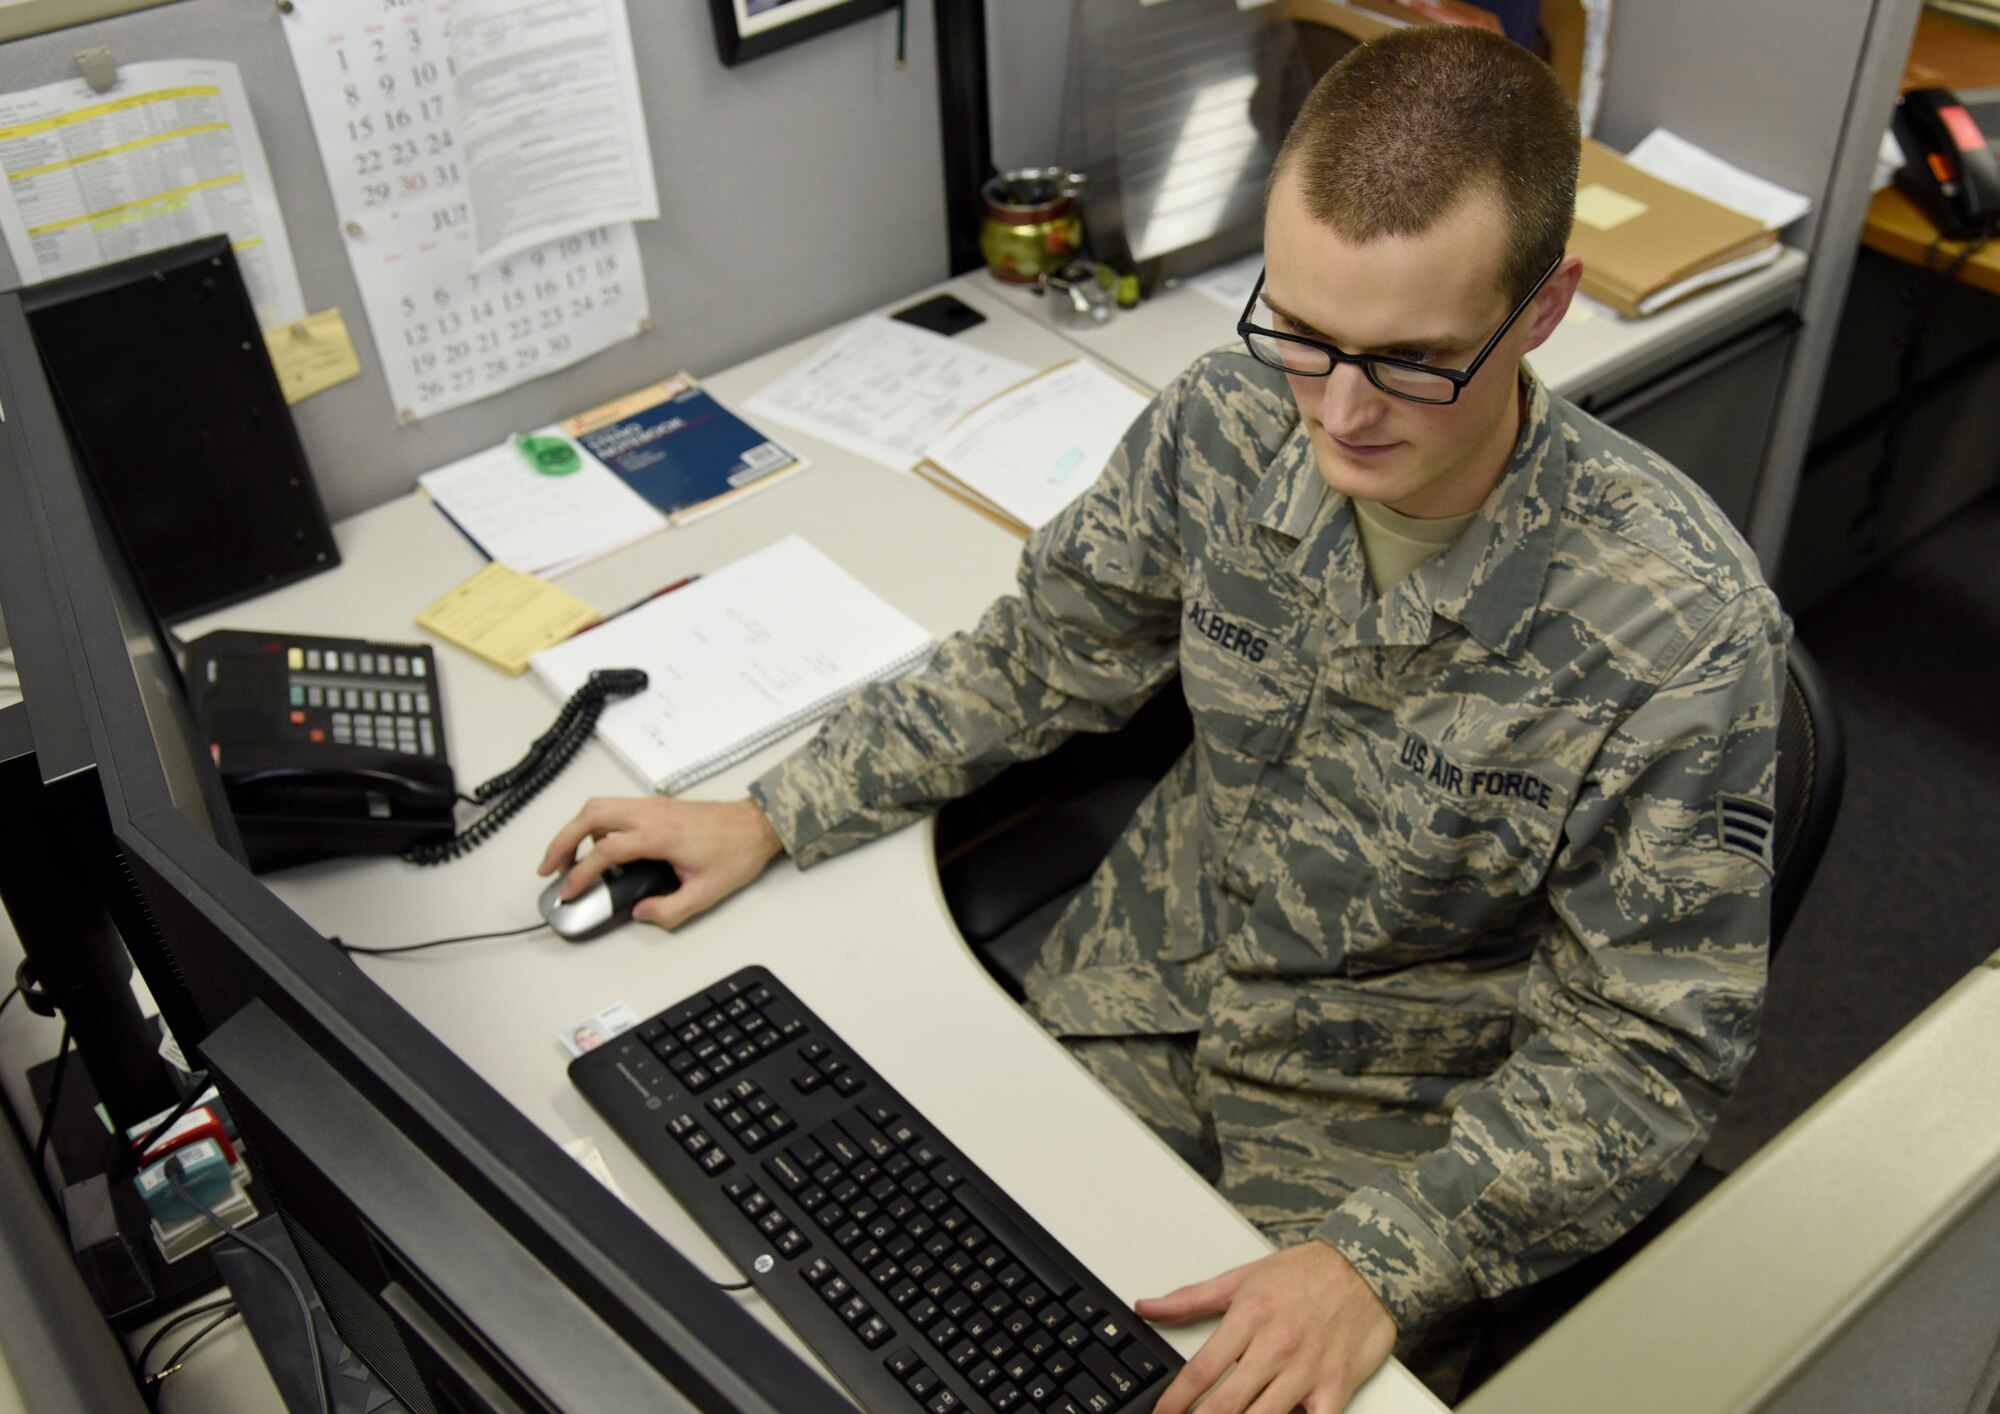 U.S. Air Force Senior Airman Benjamin Albers, a contracting specialist with the 35th Contracting Squadron, completes solicitations at Misawa Air Base, Japan, June 15, 2016. Solicitations are requests for work the 35th CONS inputs into the Federal Business Opportunity database. The requests specify the needs and terms of the work to be done and are then reviewed by contracting specialists to ensure federal laws are upheld in the process. Albers hails from Rochester, Minnesota. (U.S. Air Force photo by Airman 1st Class Jordyn Fetter)